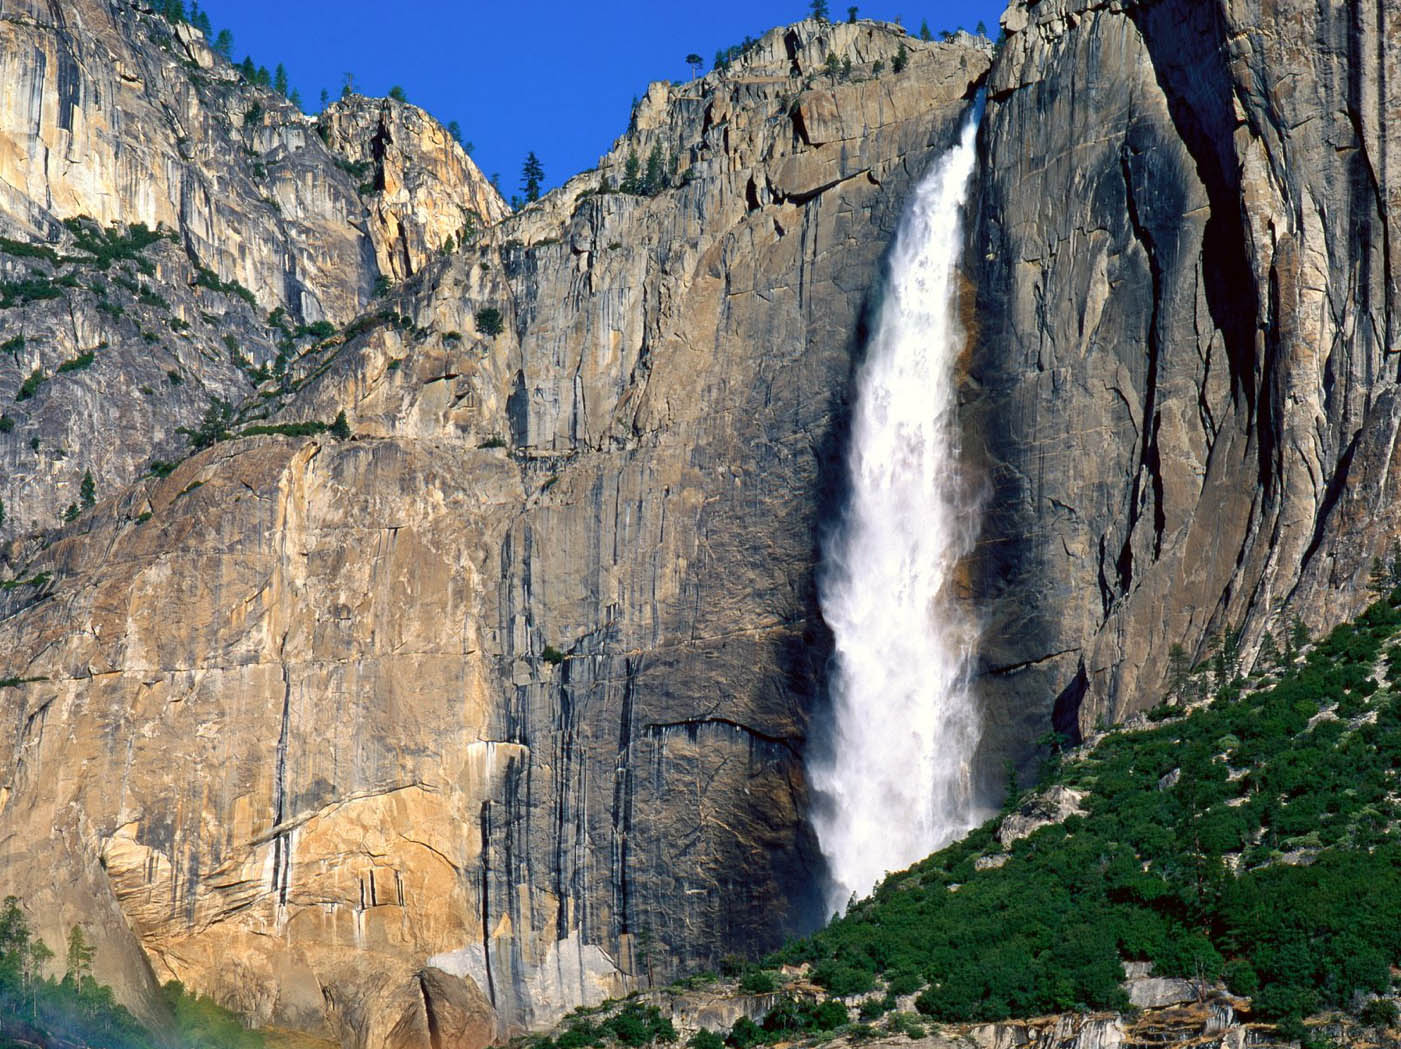 Tom fisher's photograph at Yosemite National Park